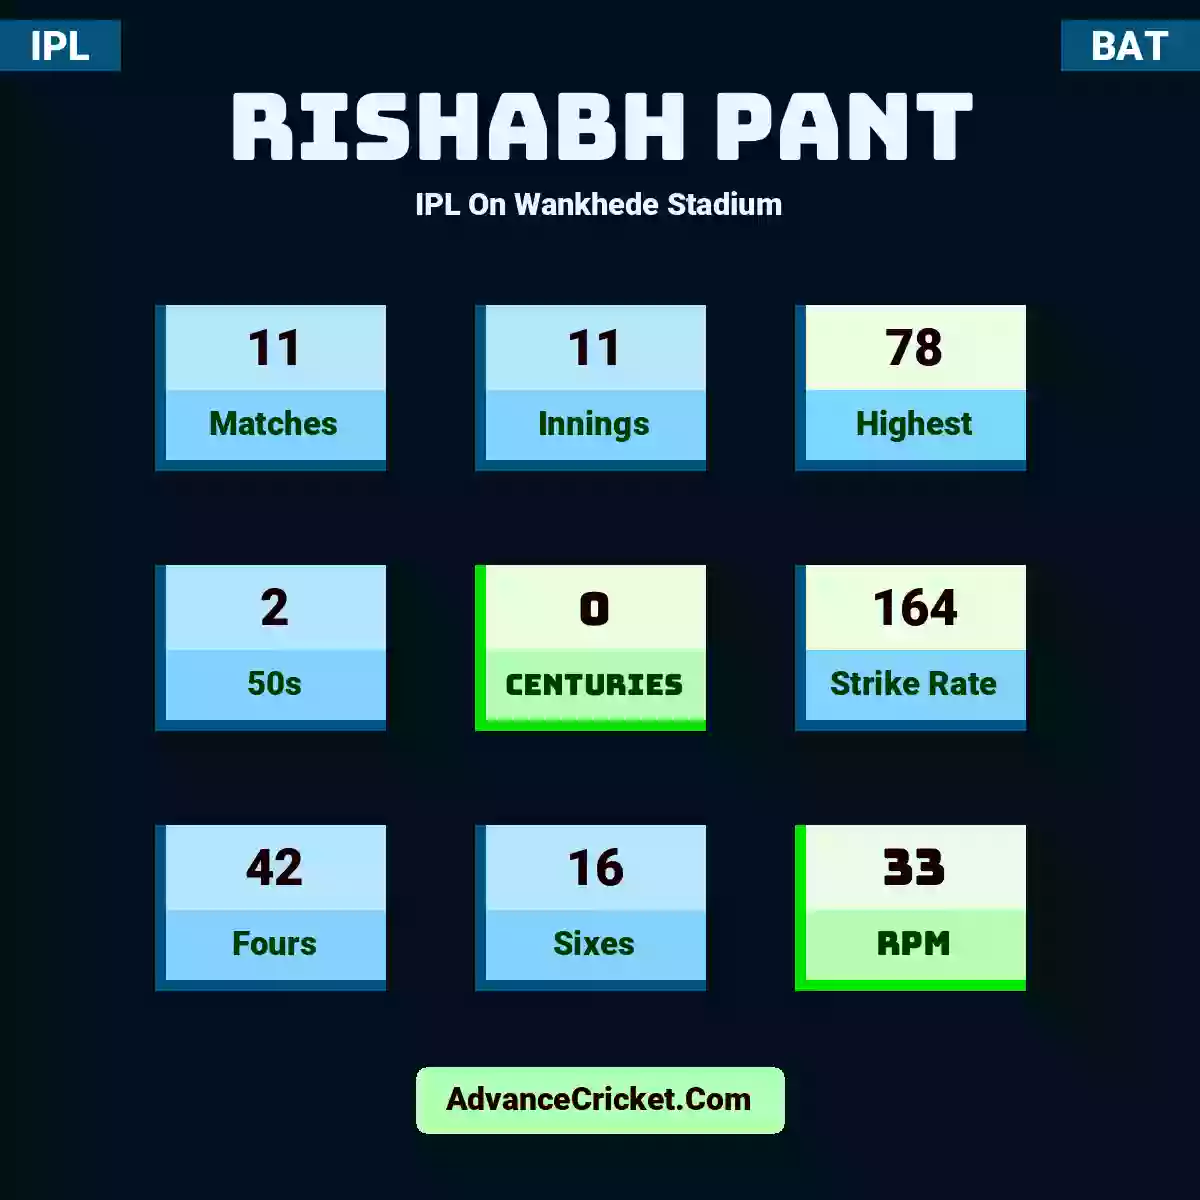 Rishabh Pant IPL  On Wankhede Stadium, Rishabh Pant played 11 matches, scored 78 runs as highest, 2 half-centuries, and 0 centuries, with a strike rate of 164. R.Pant hit 42 fours and 16 sixes, with an RPM of 33.